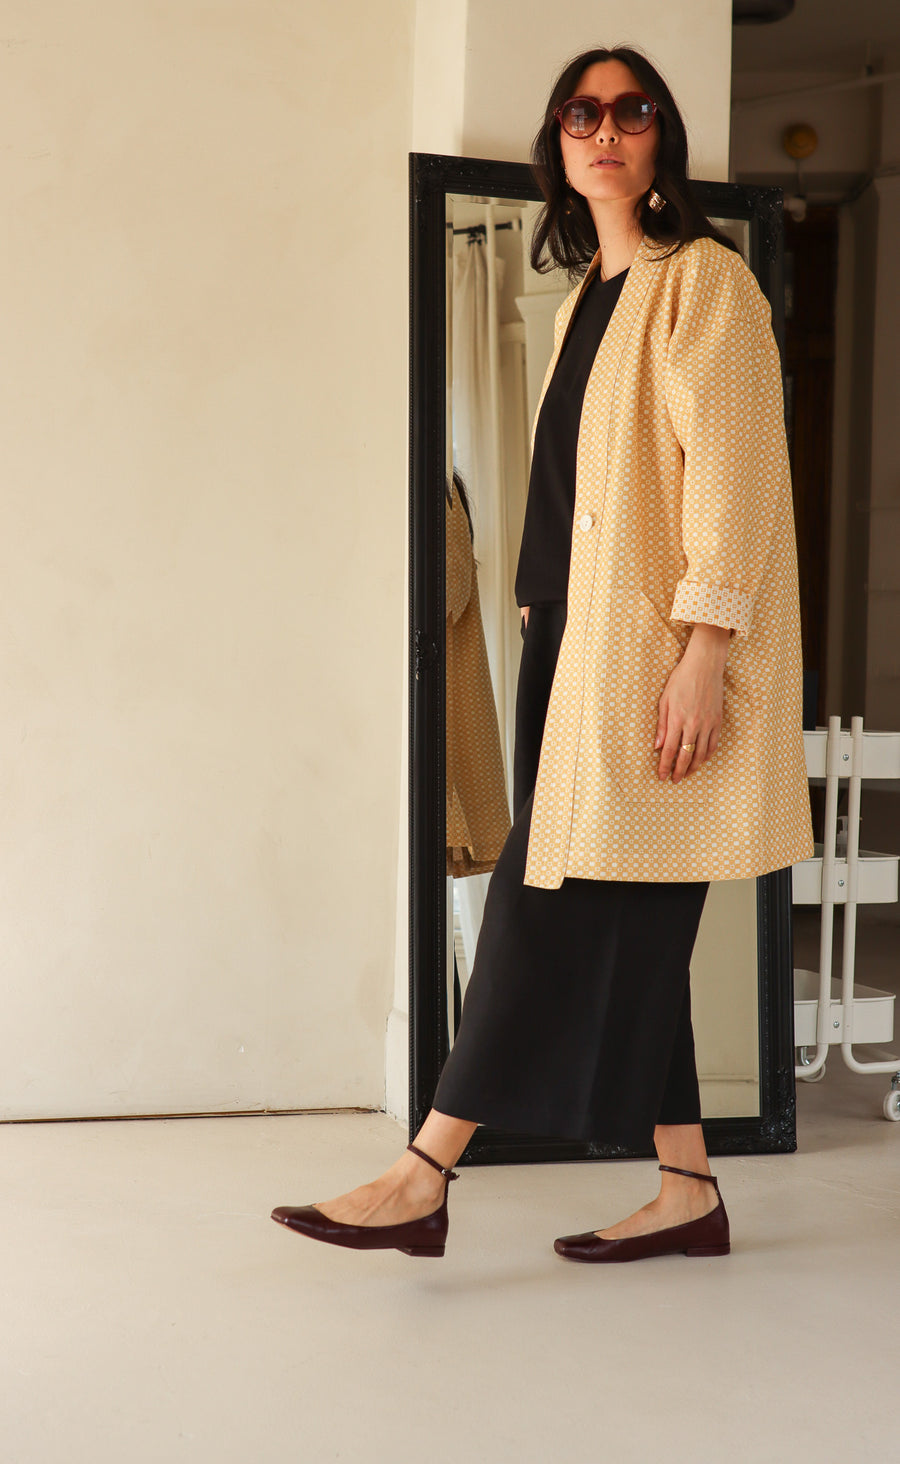 The Admirer - Long Sleeve Duster Coat - Cotton Jacquard